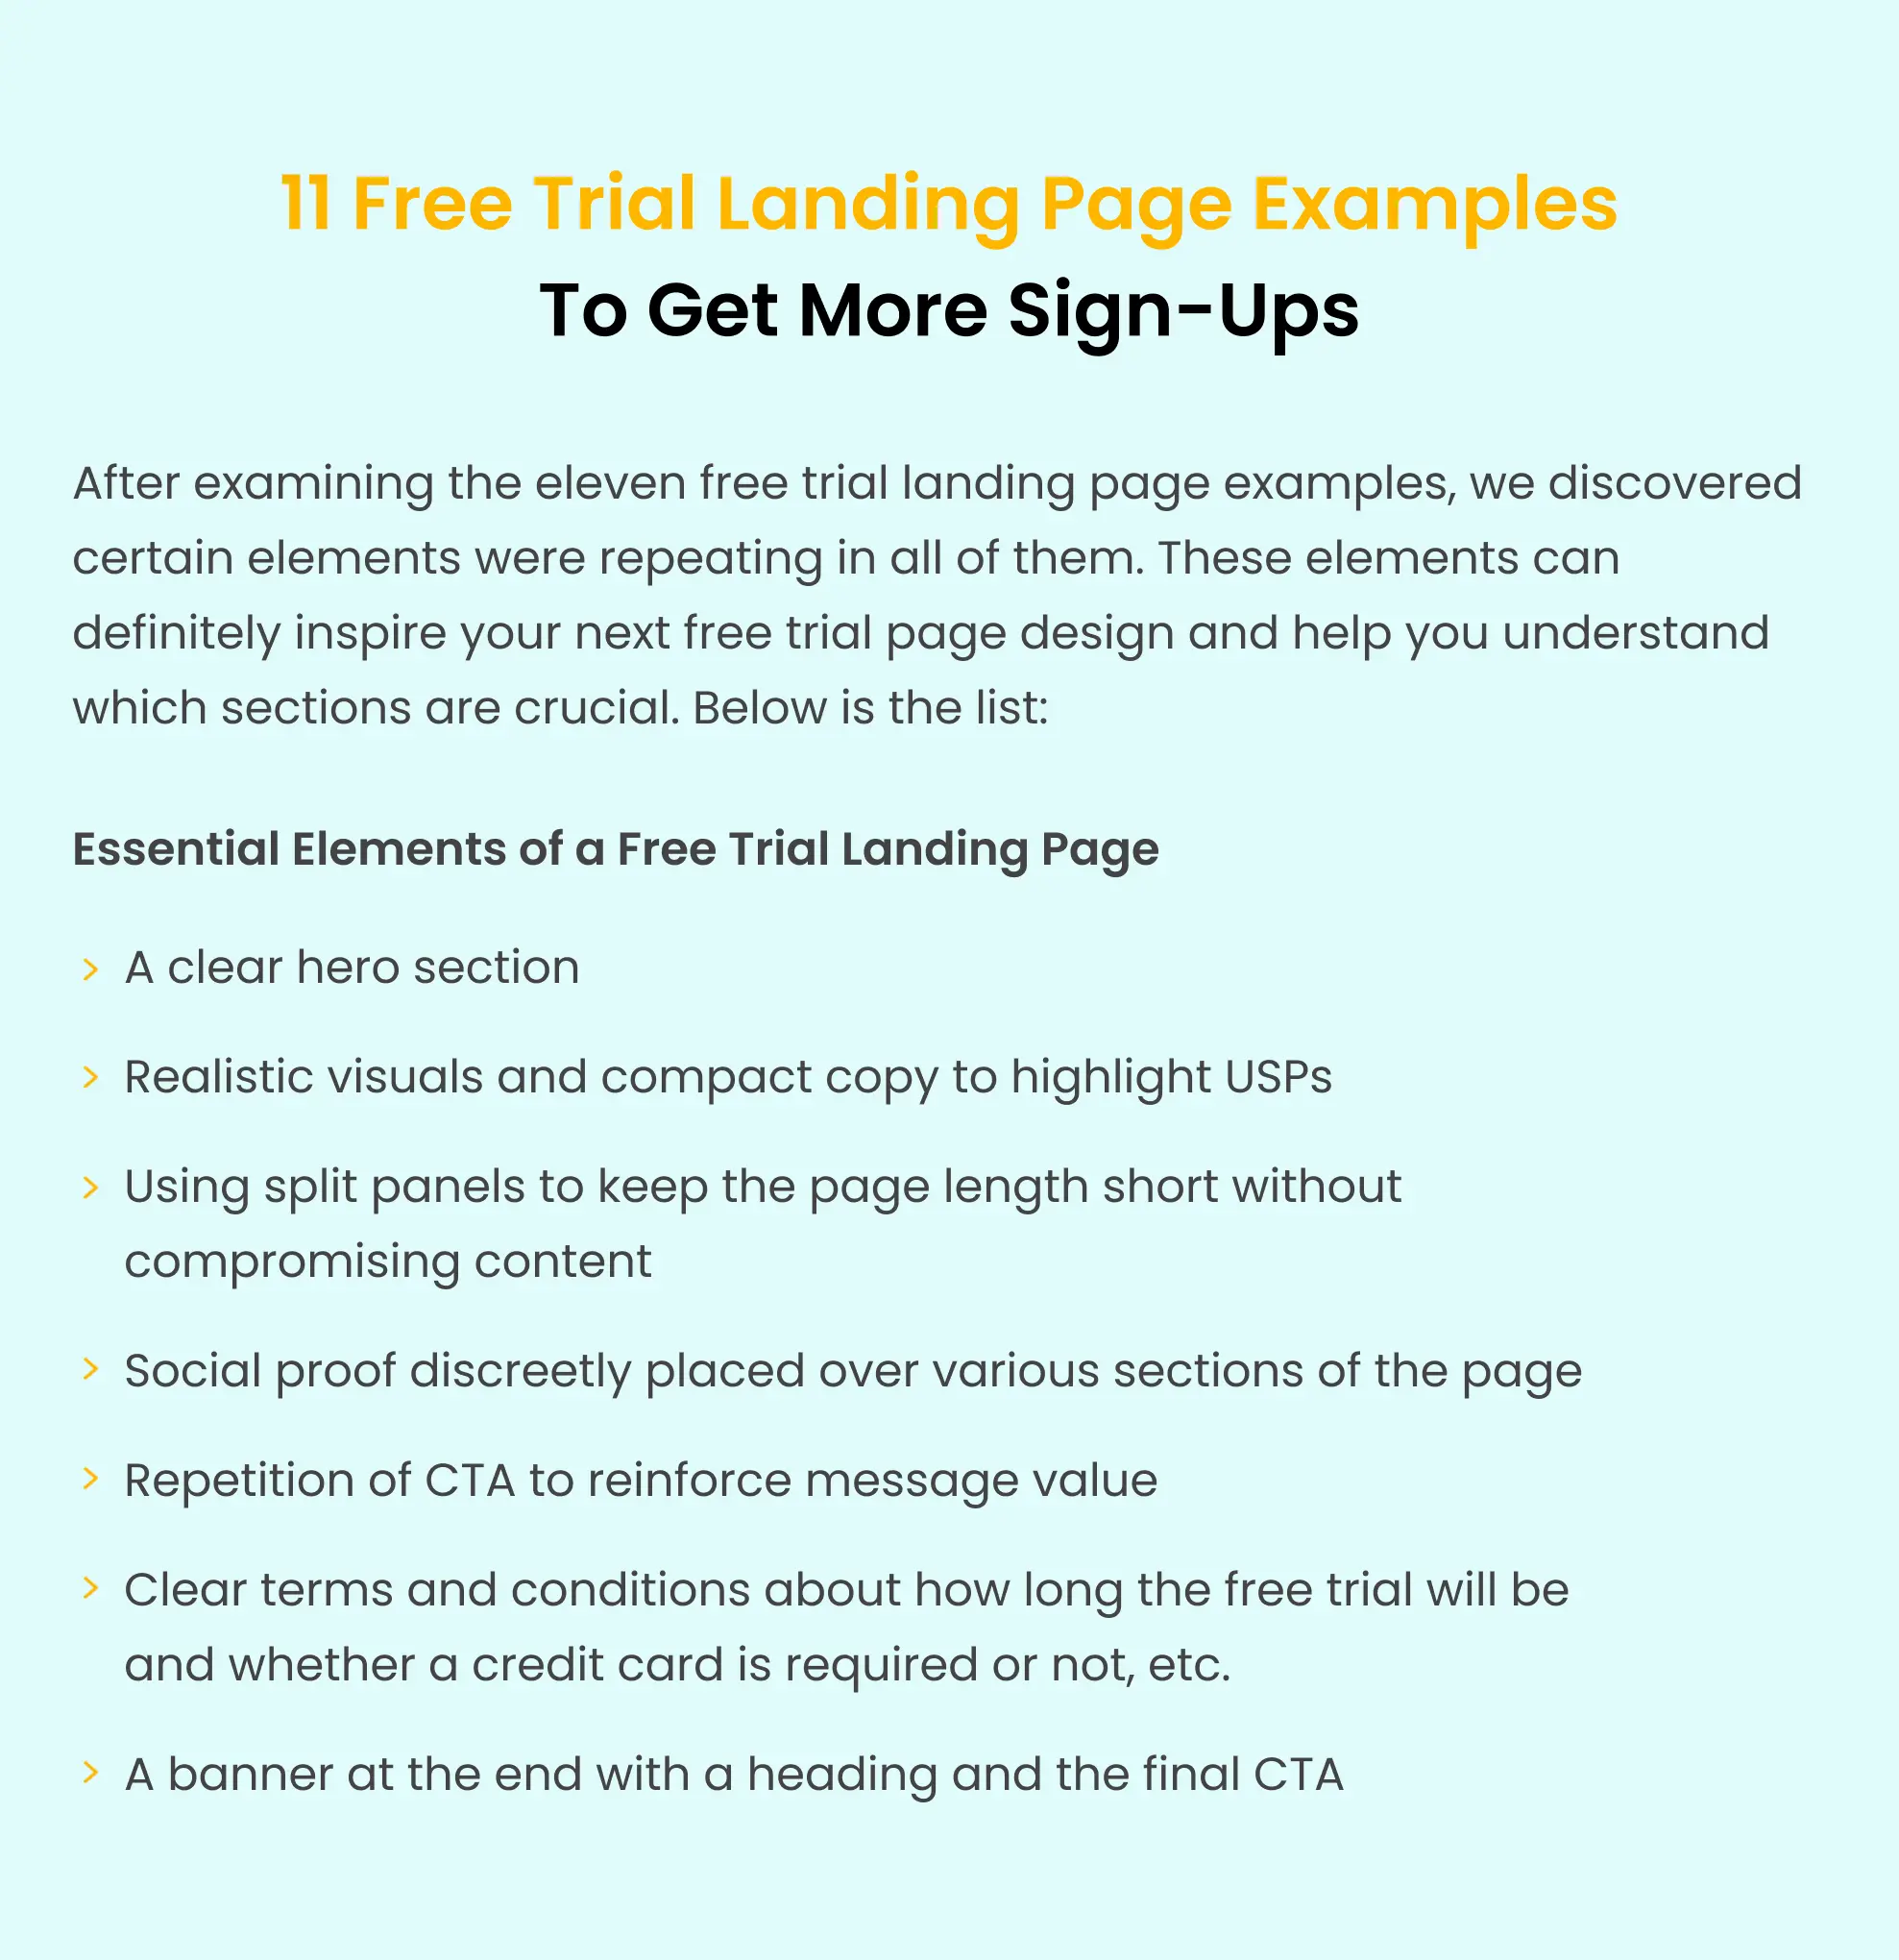 free-trial-landing-page-examples-summary.webp